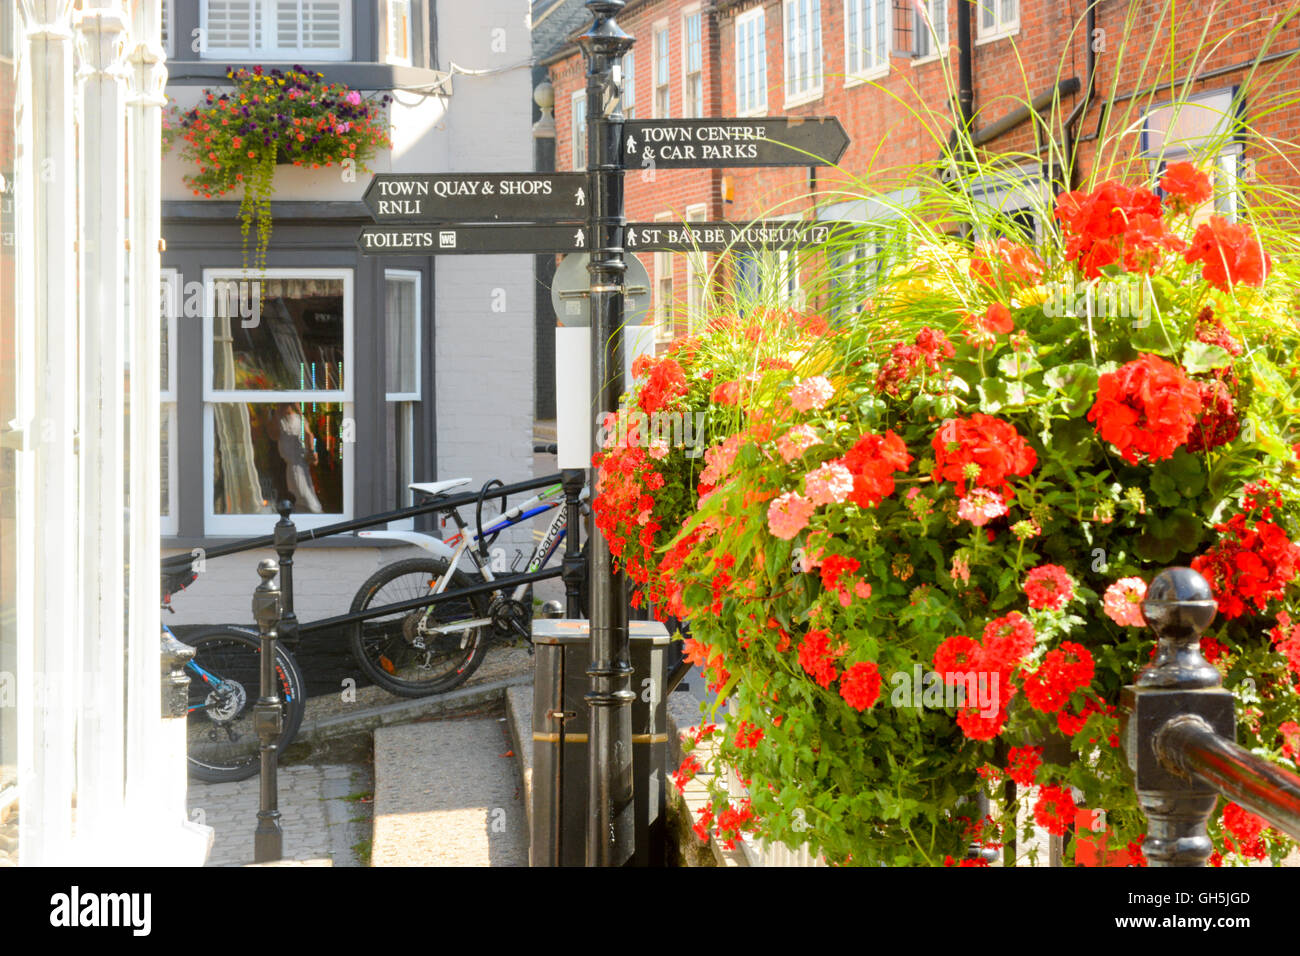 Floral street decorations in the south coast town of Lymington, Hampshire, UK. Stock Photo